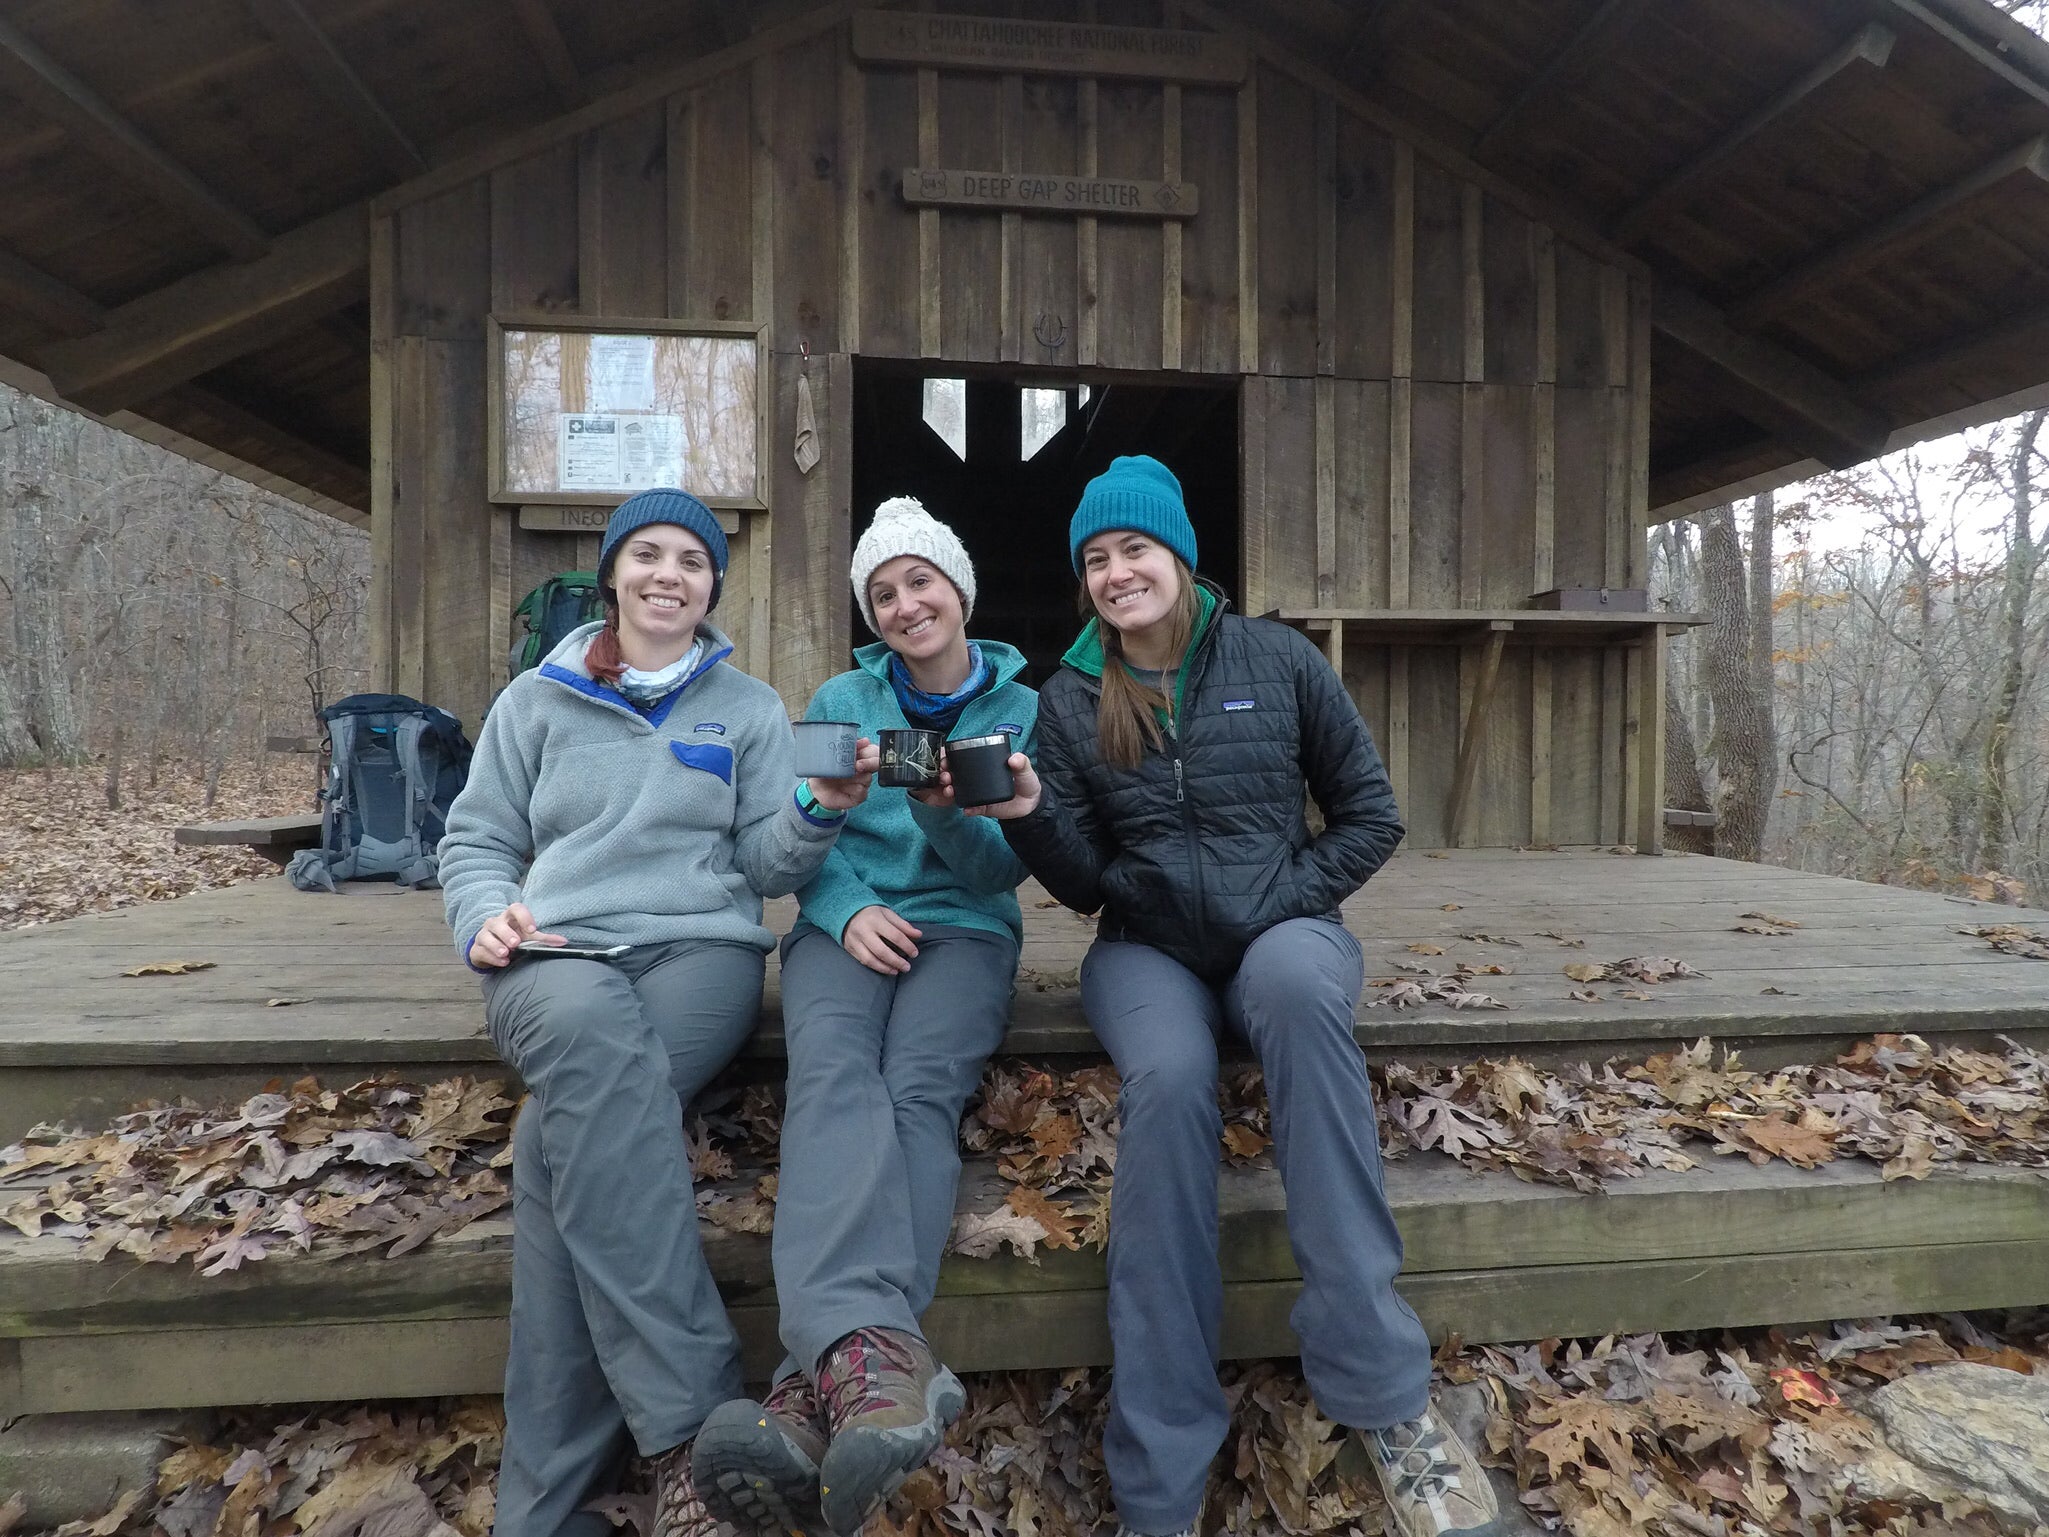 Camper submitted image from Deep Gap Shelter - 2